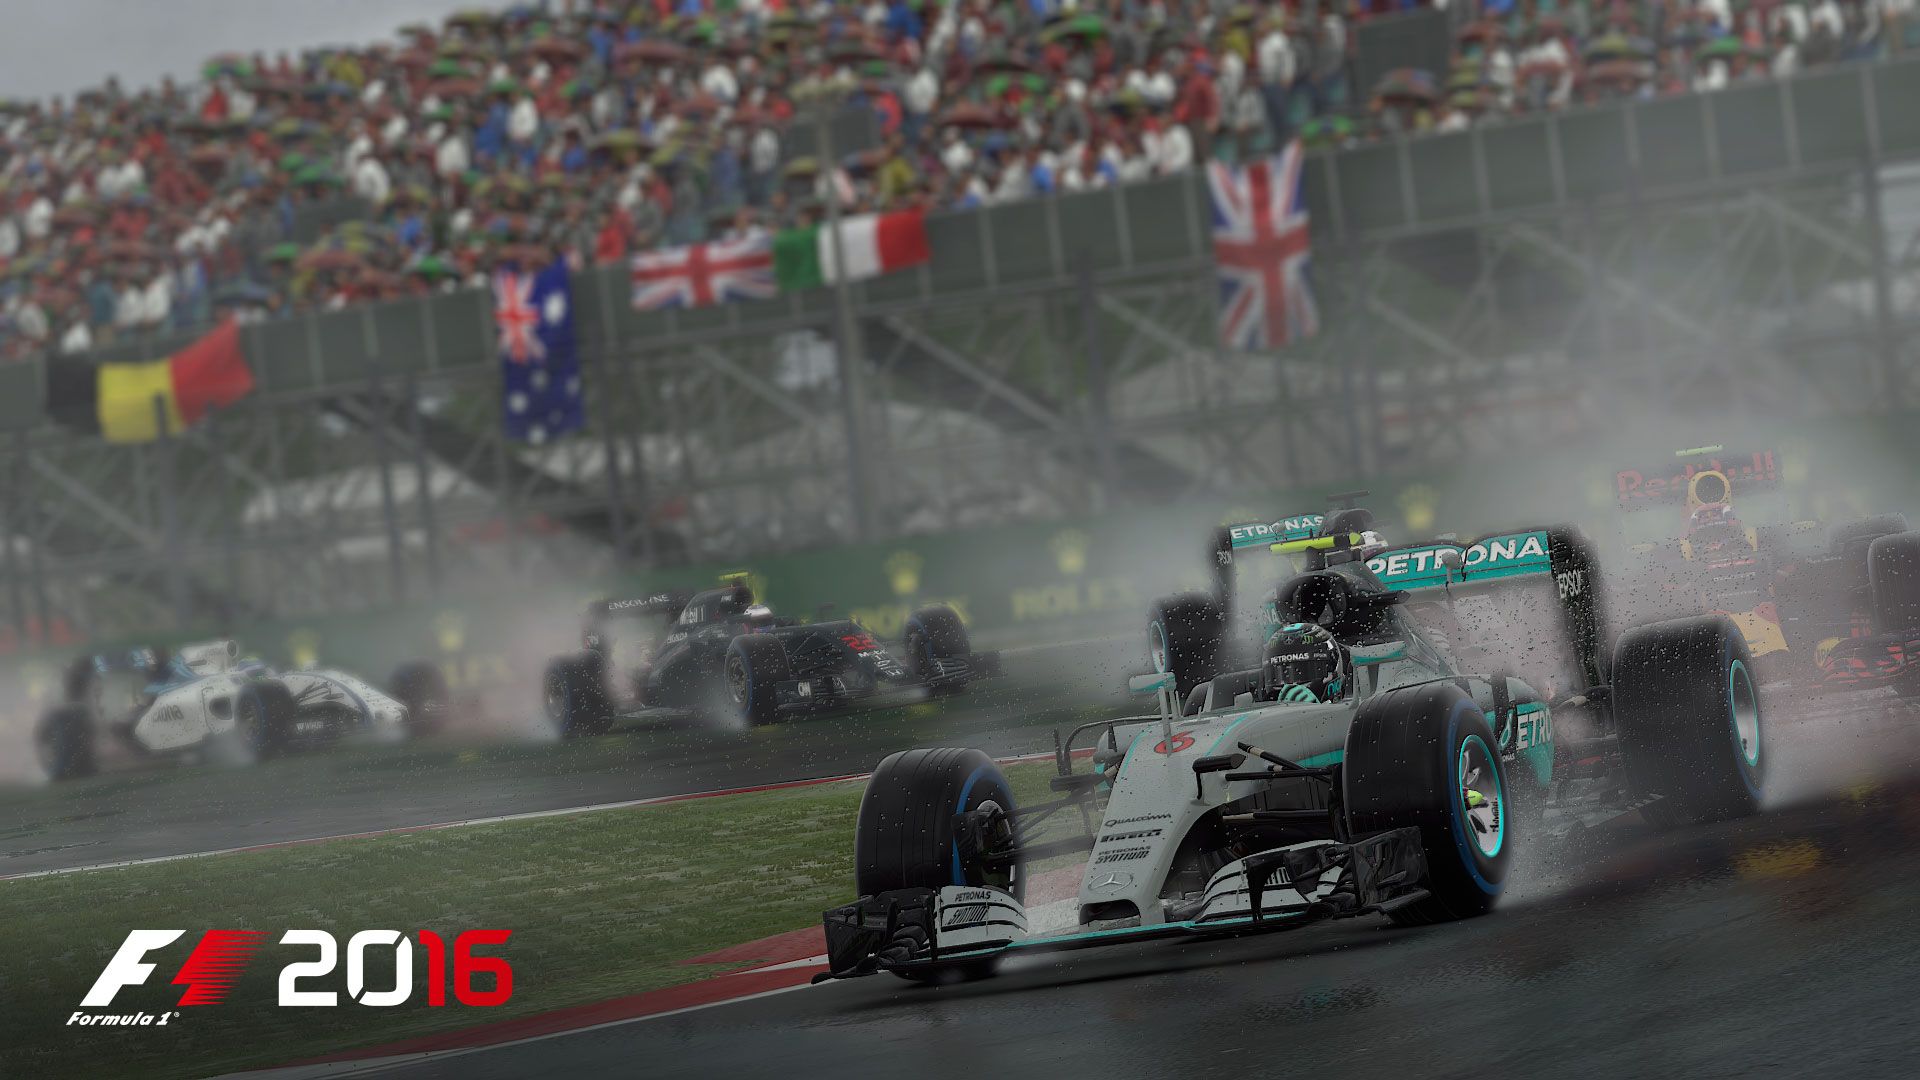 f1 2016 HD wallpapers backgrounds